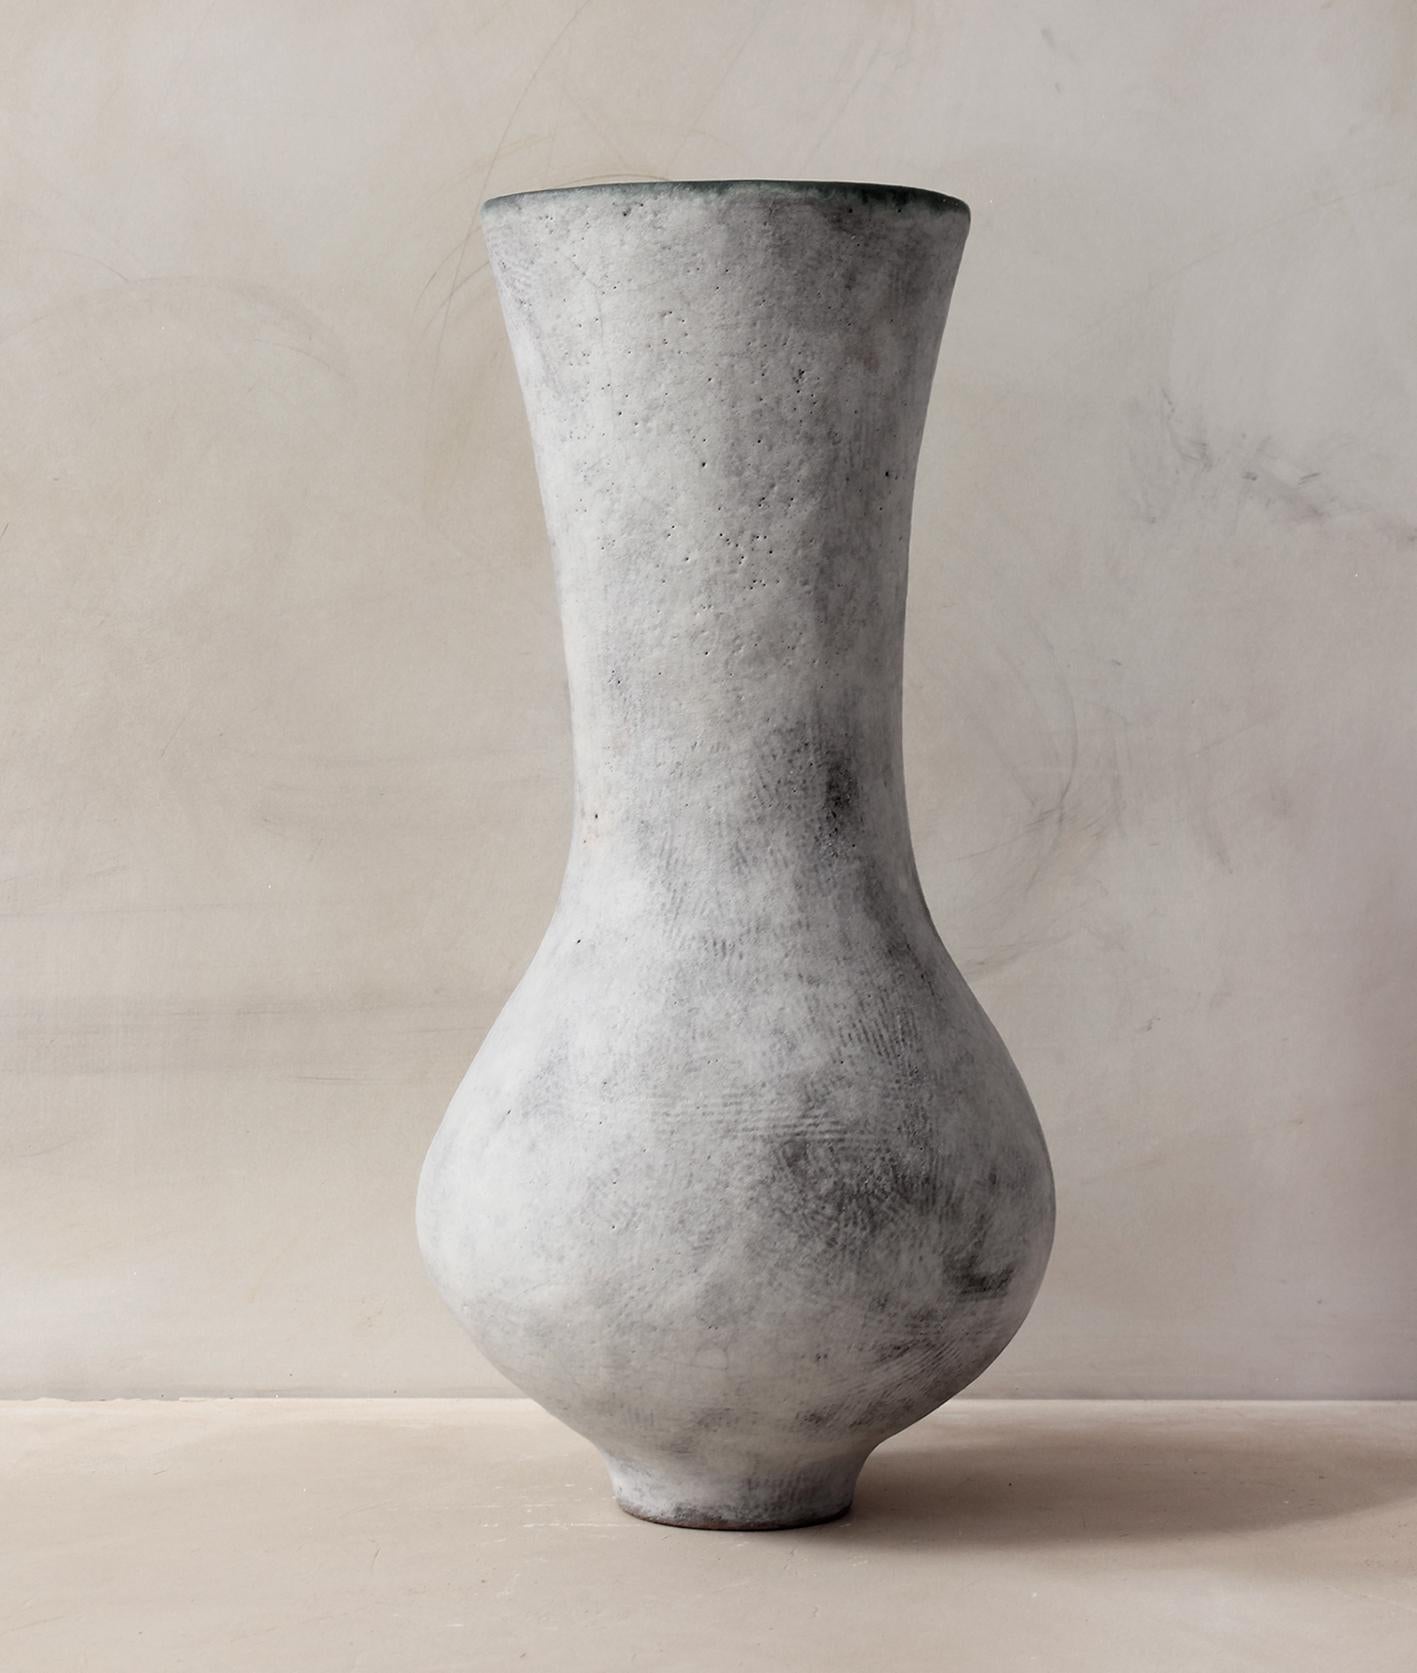 Ghostcup vase by Silvia Valentín
2019
Signed
Materials: Stoneware, mineral glaze
Dimensions: diameter 18 cm x 36.5 cm high
Weight: 2.730 kg

Silvia Valentín
Graduated in Fine Arts in 1991. 
Restorer of wall paintings and